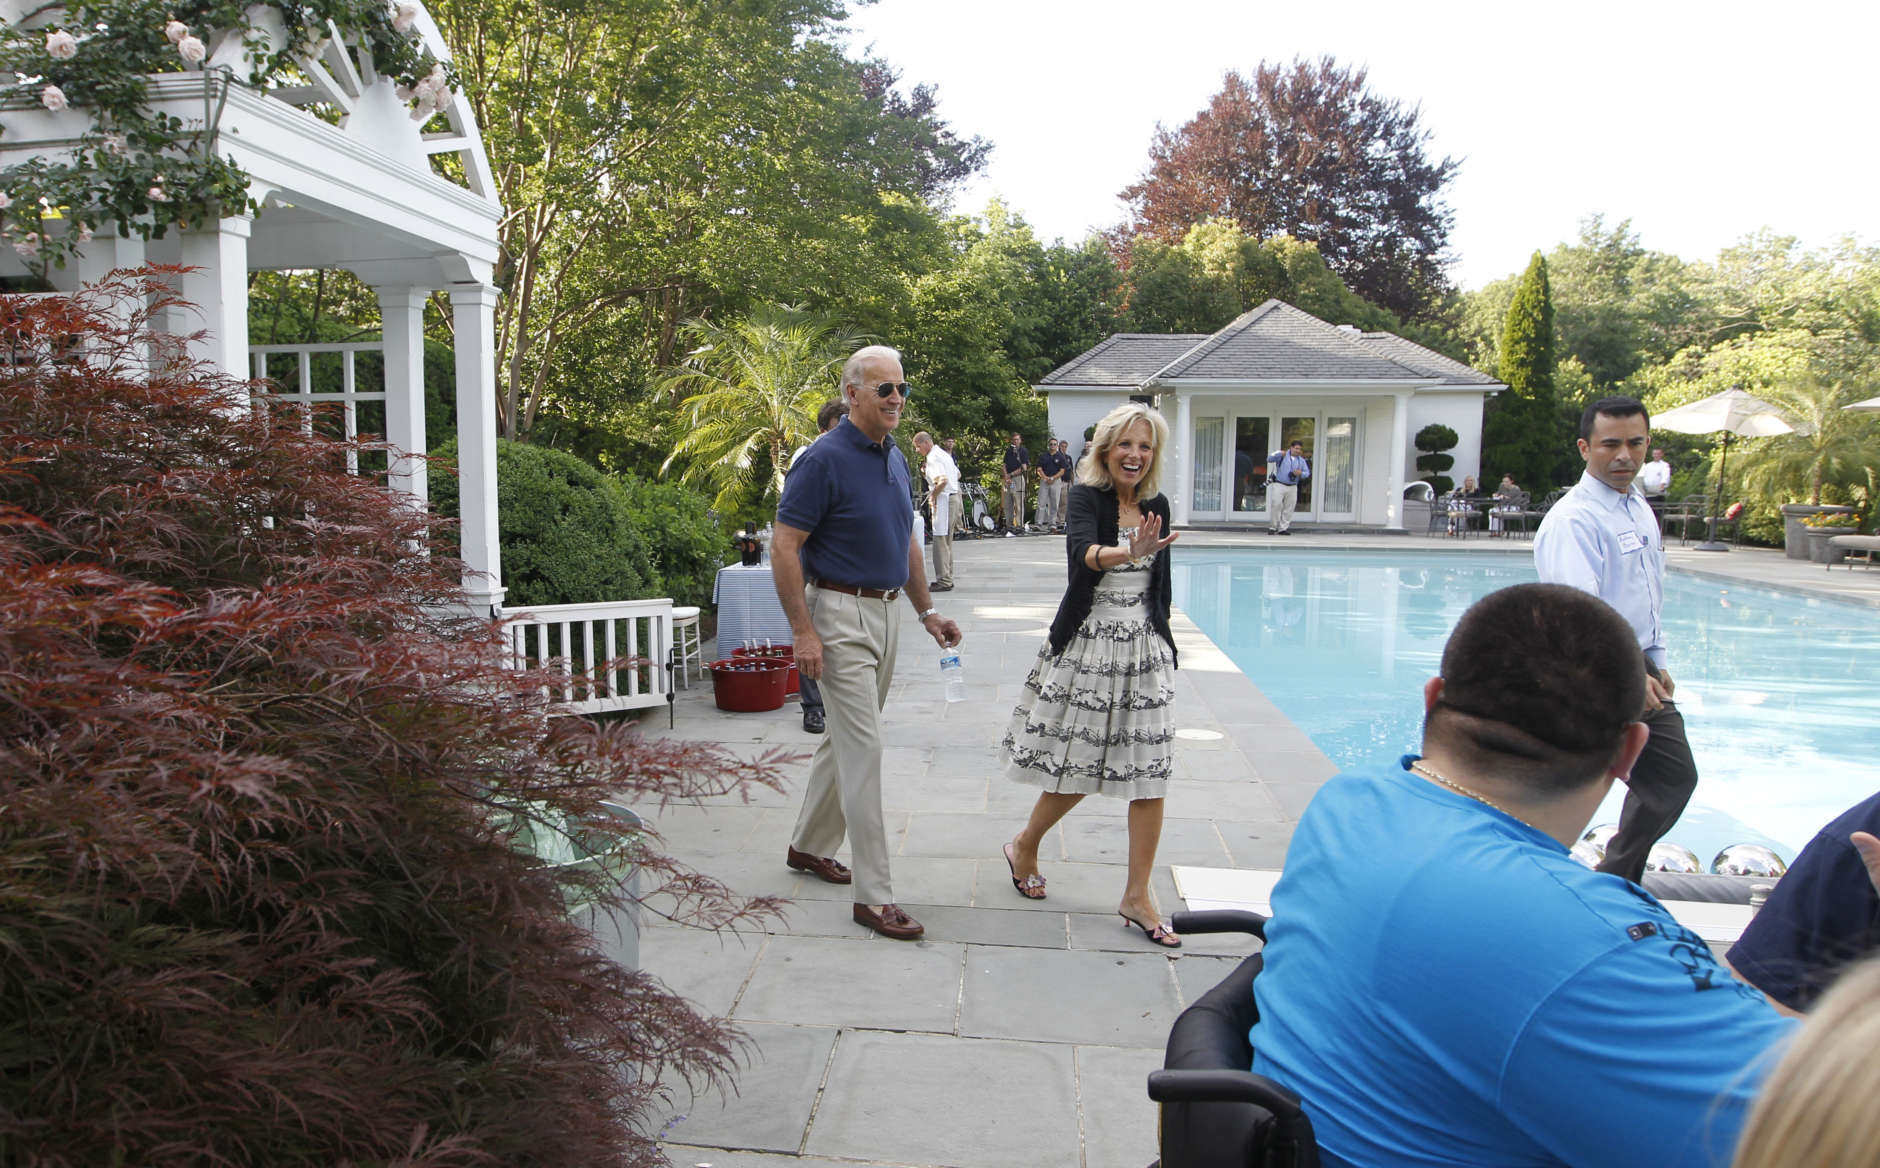 Vice President Joe Biden and Dr. Jill Biden host a barbeque for wounded service members from Walter Reed Army Medical Center outpatients and their families at the Vice President's residence at the Naval Observatory in Washington, Tuesday, May 25, 2010. The service members currently reside at the Mologne House, which offers housing for patients and their families while they undergo rehabilitation and treatment. (AP Photo/Charles Dharapak)